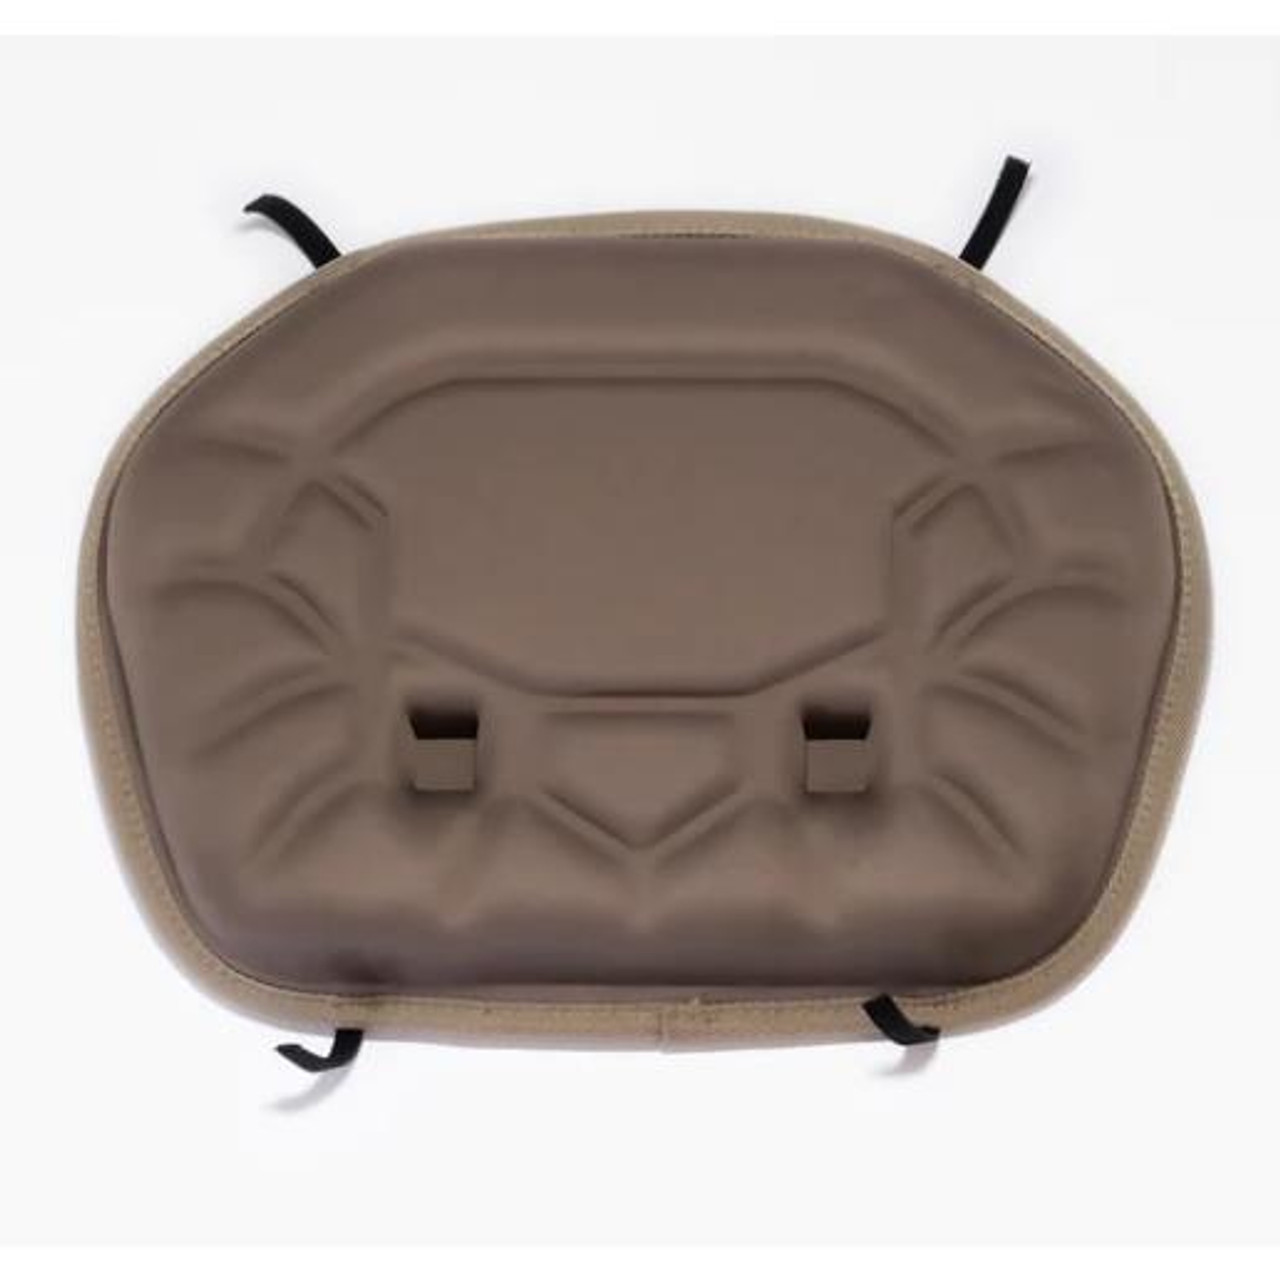 https://cdn11.bigcommerce.com/s-70mih4s/images/stencil/1280x1280/products/22195/59022/Novix-Outdoors-Hang-On-Seat-Cushion-177778_image1__28442.1656018344.jpg?c=2